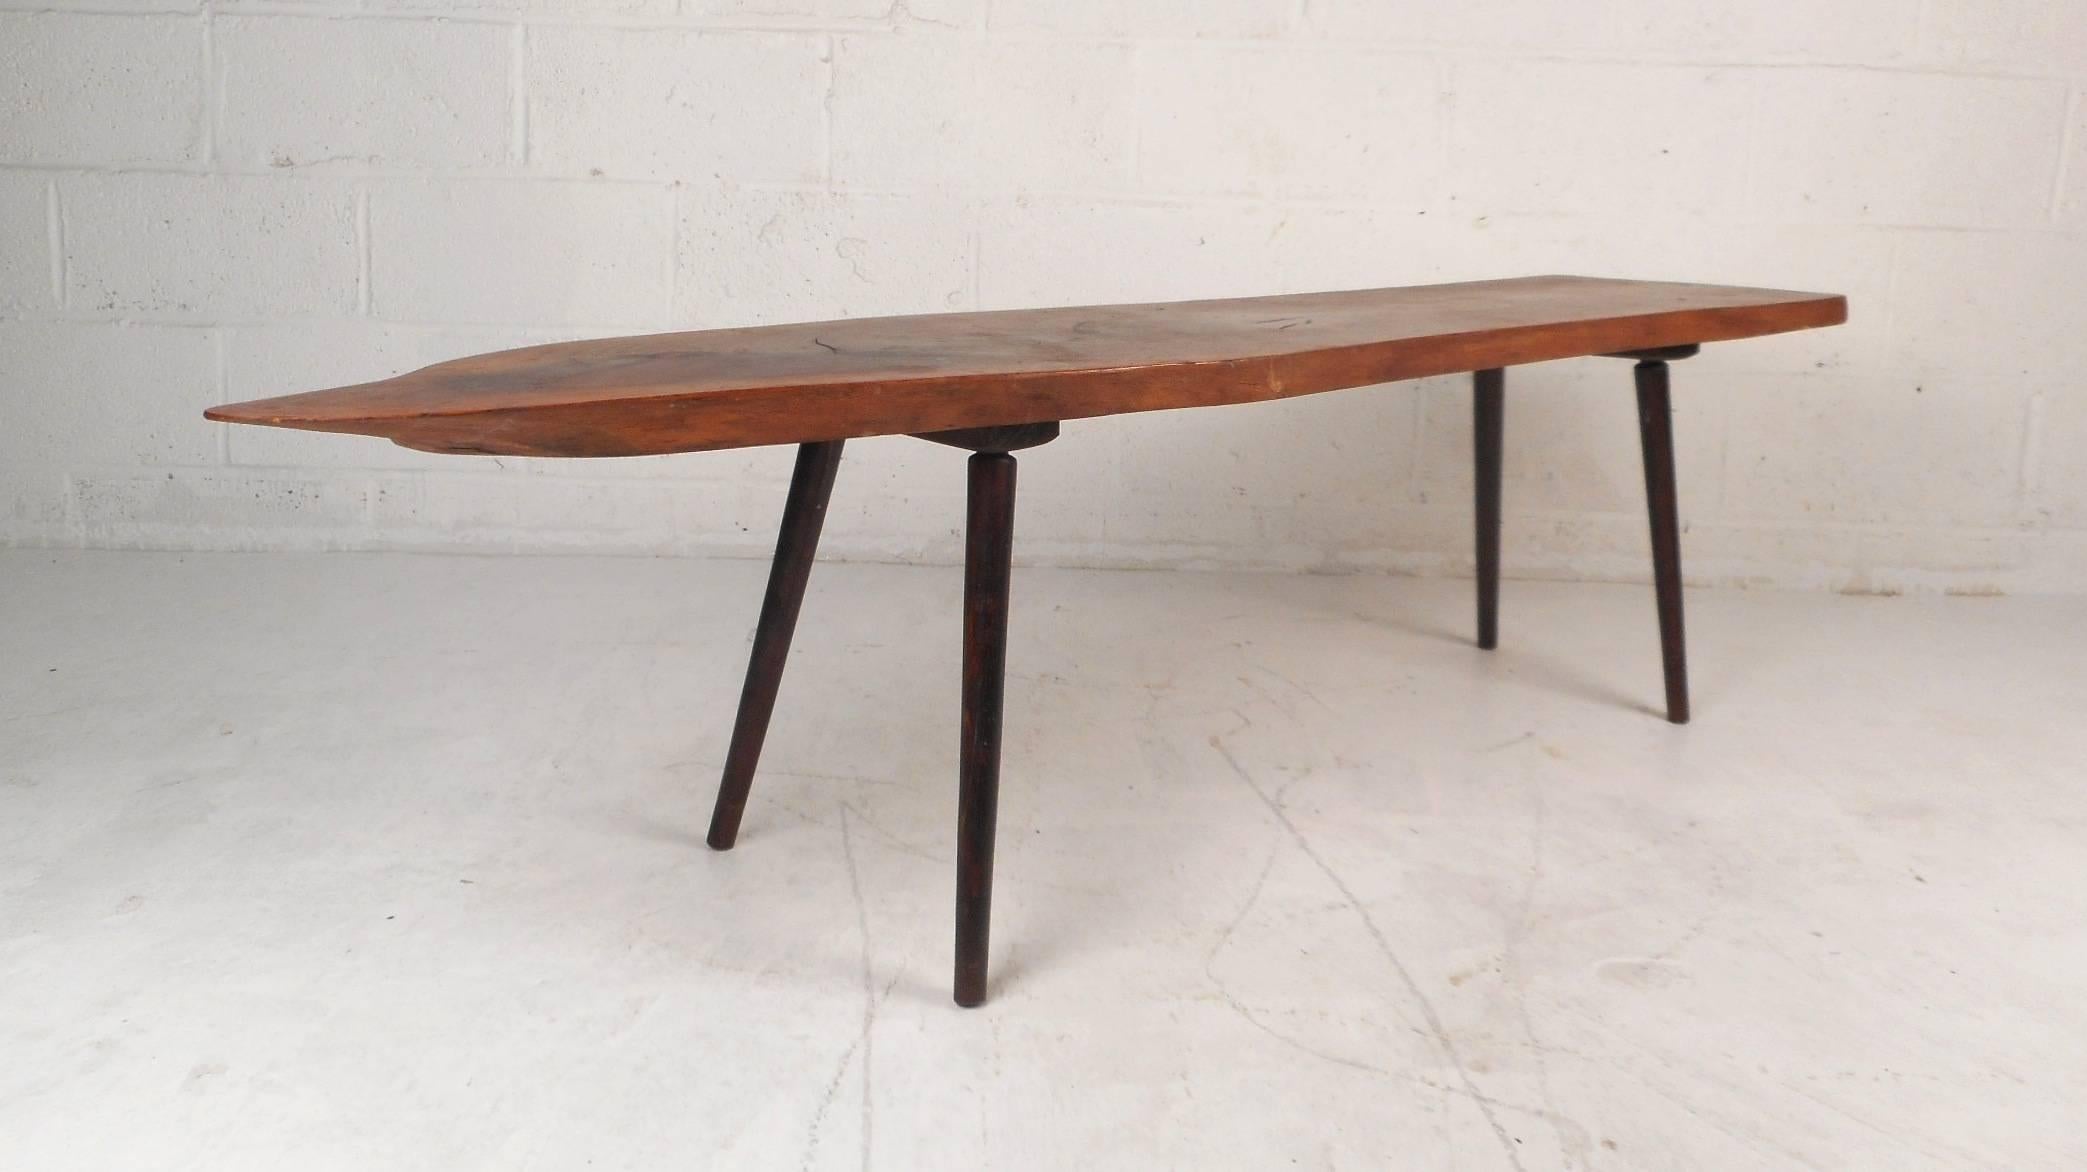 This gorgeous vintage modern coffee table features a unique tree slab top. Stylish design with splayed legs and a free-form live edge tabletop. Quality design with wonderful wood grain makes the perfect eye-catching addition to any modern interior.